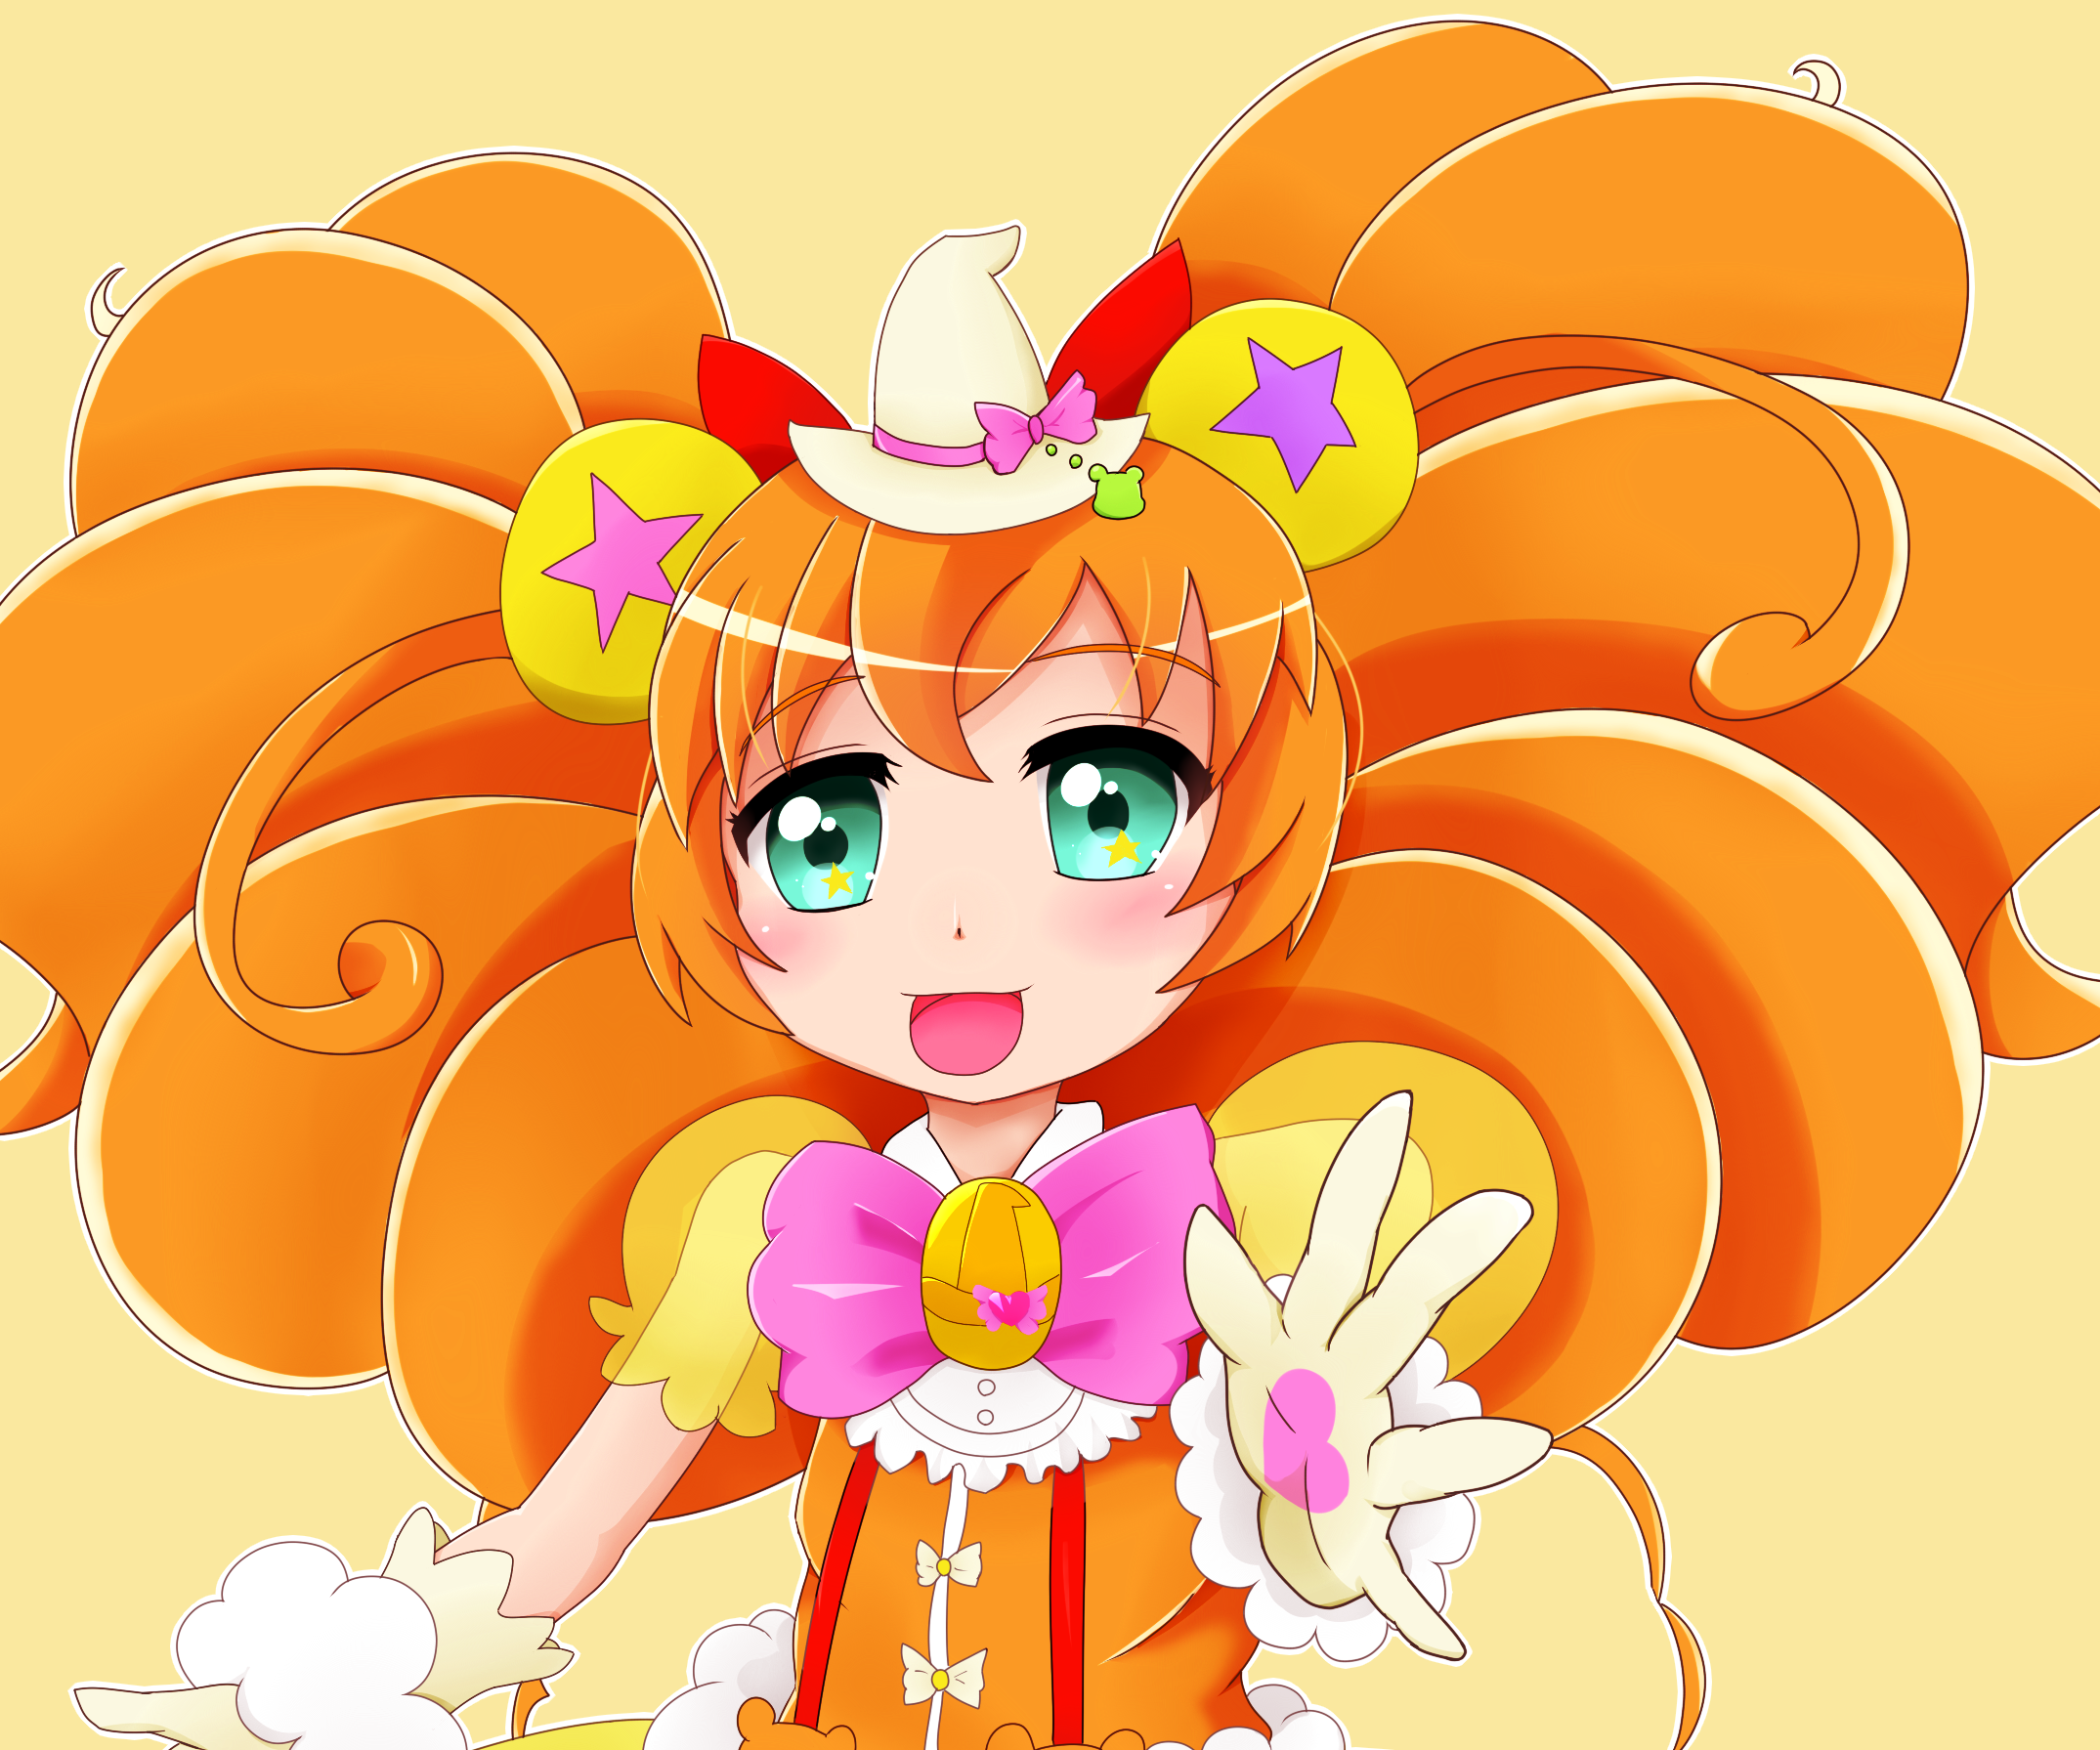 Anime Witchy PreCure! HD Wallpaper | Background Image